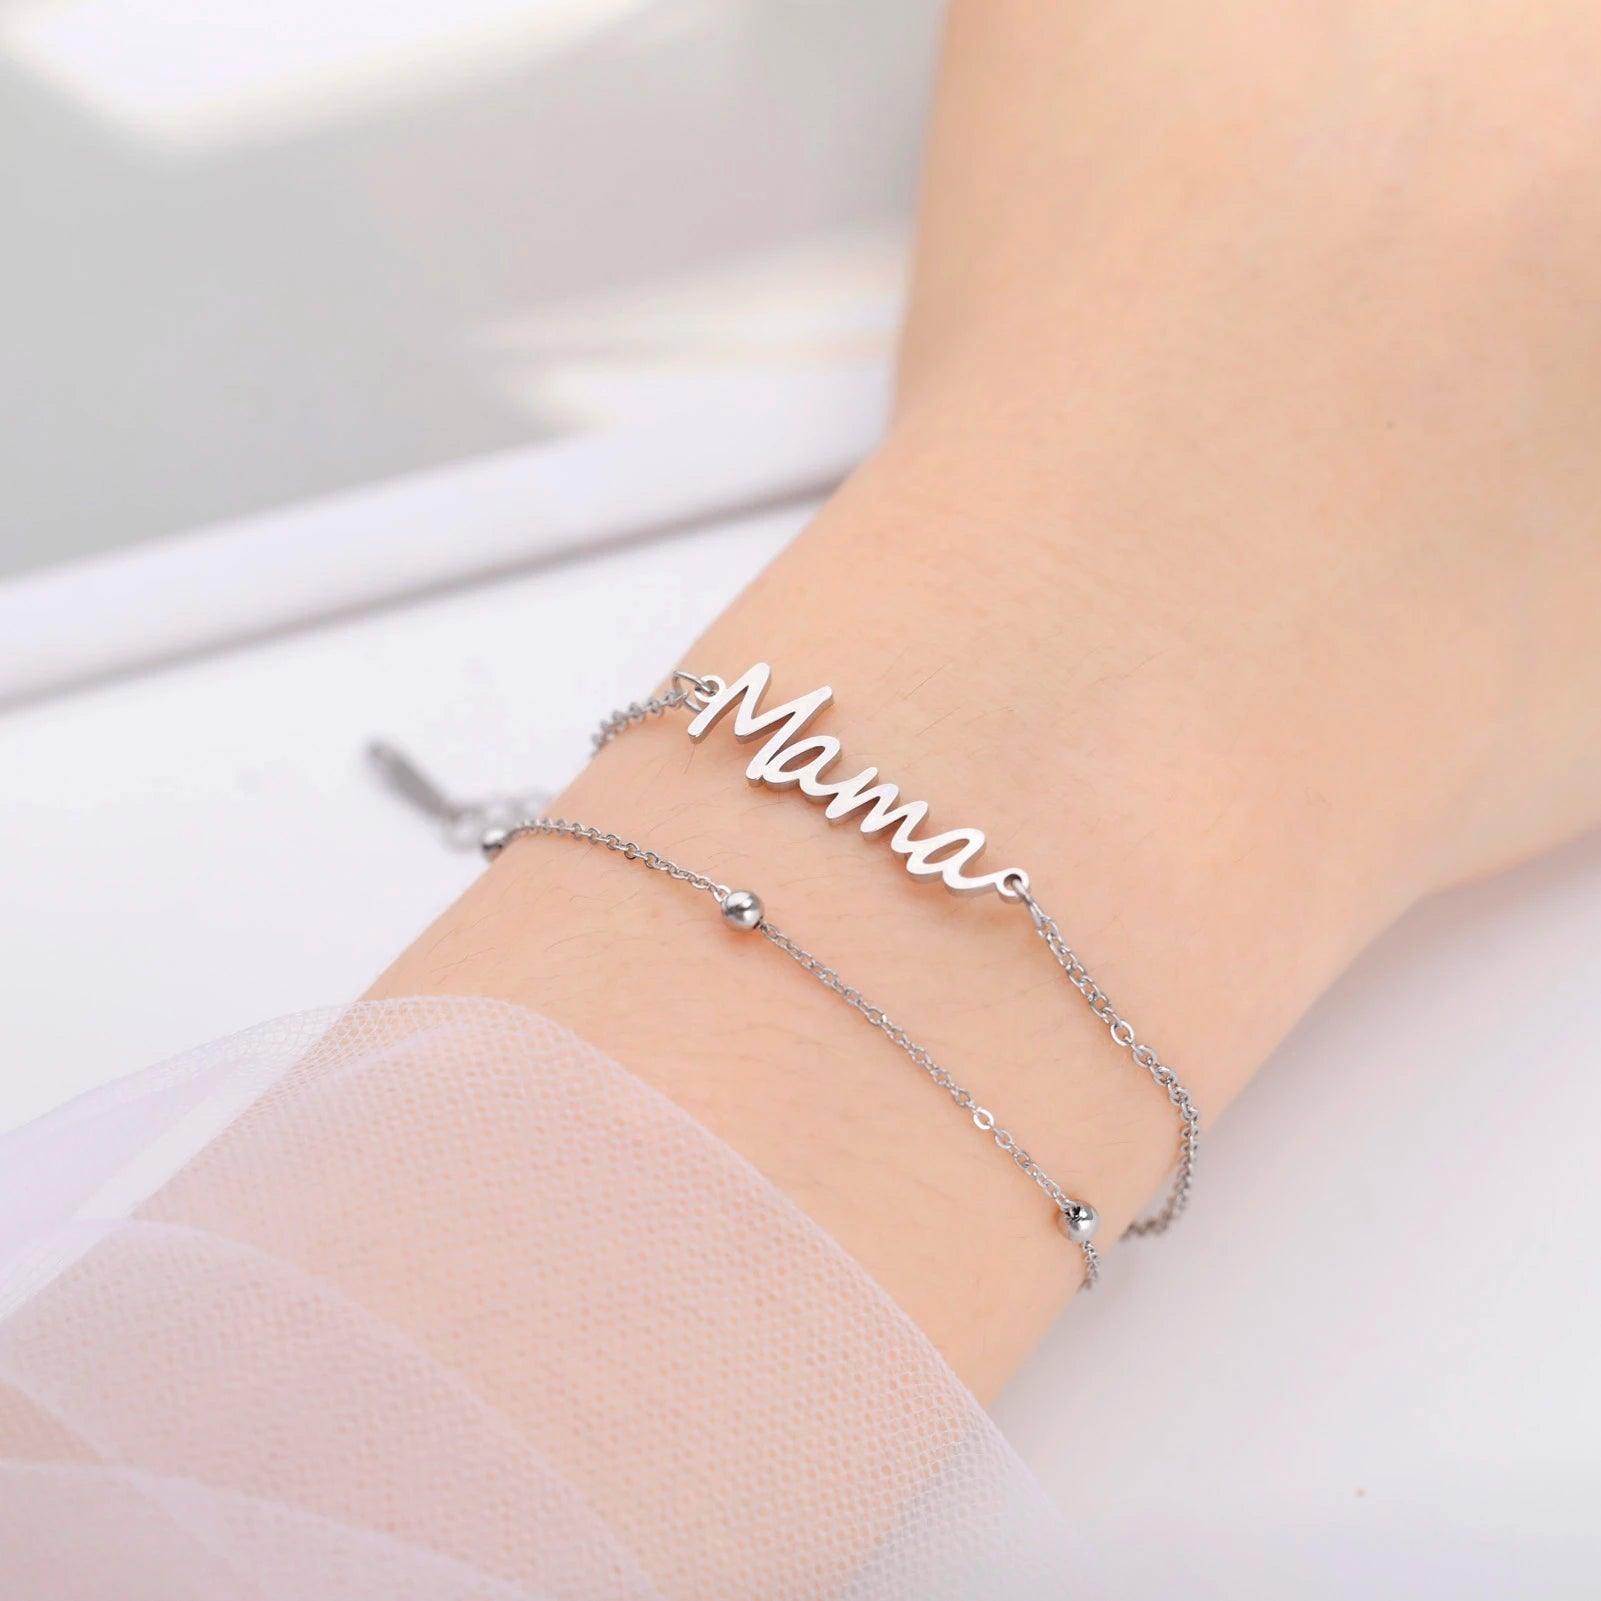 Letter 'Mama' Charm Bracelet in double Layer Chain: Mother's Day Gift - Heart Crafted Gifts